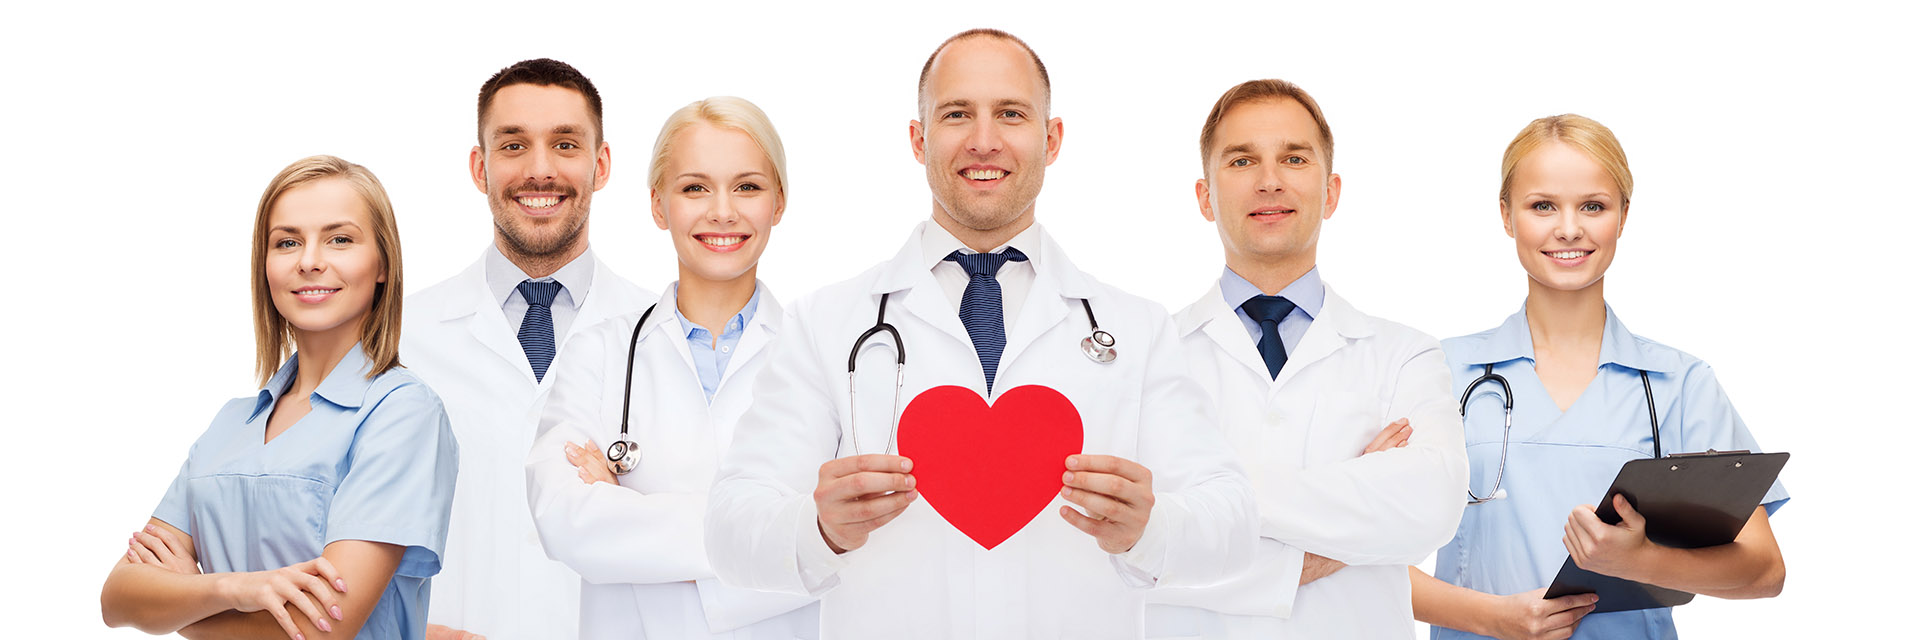 Group of providers Holding heart